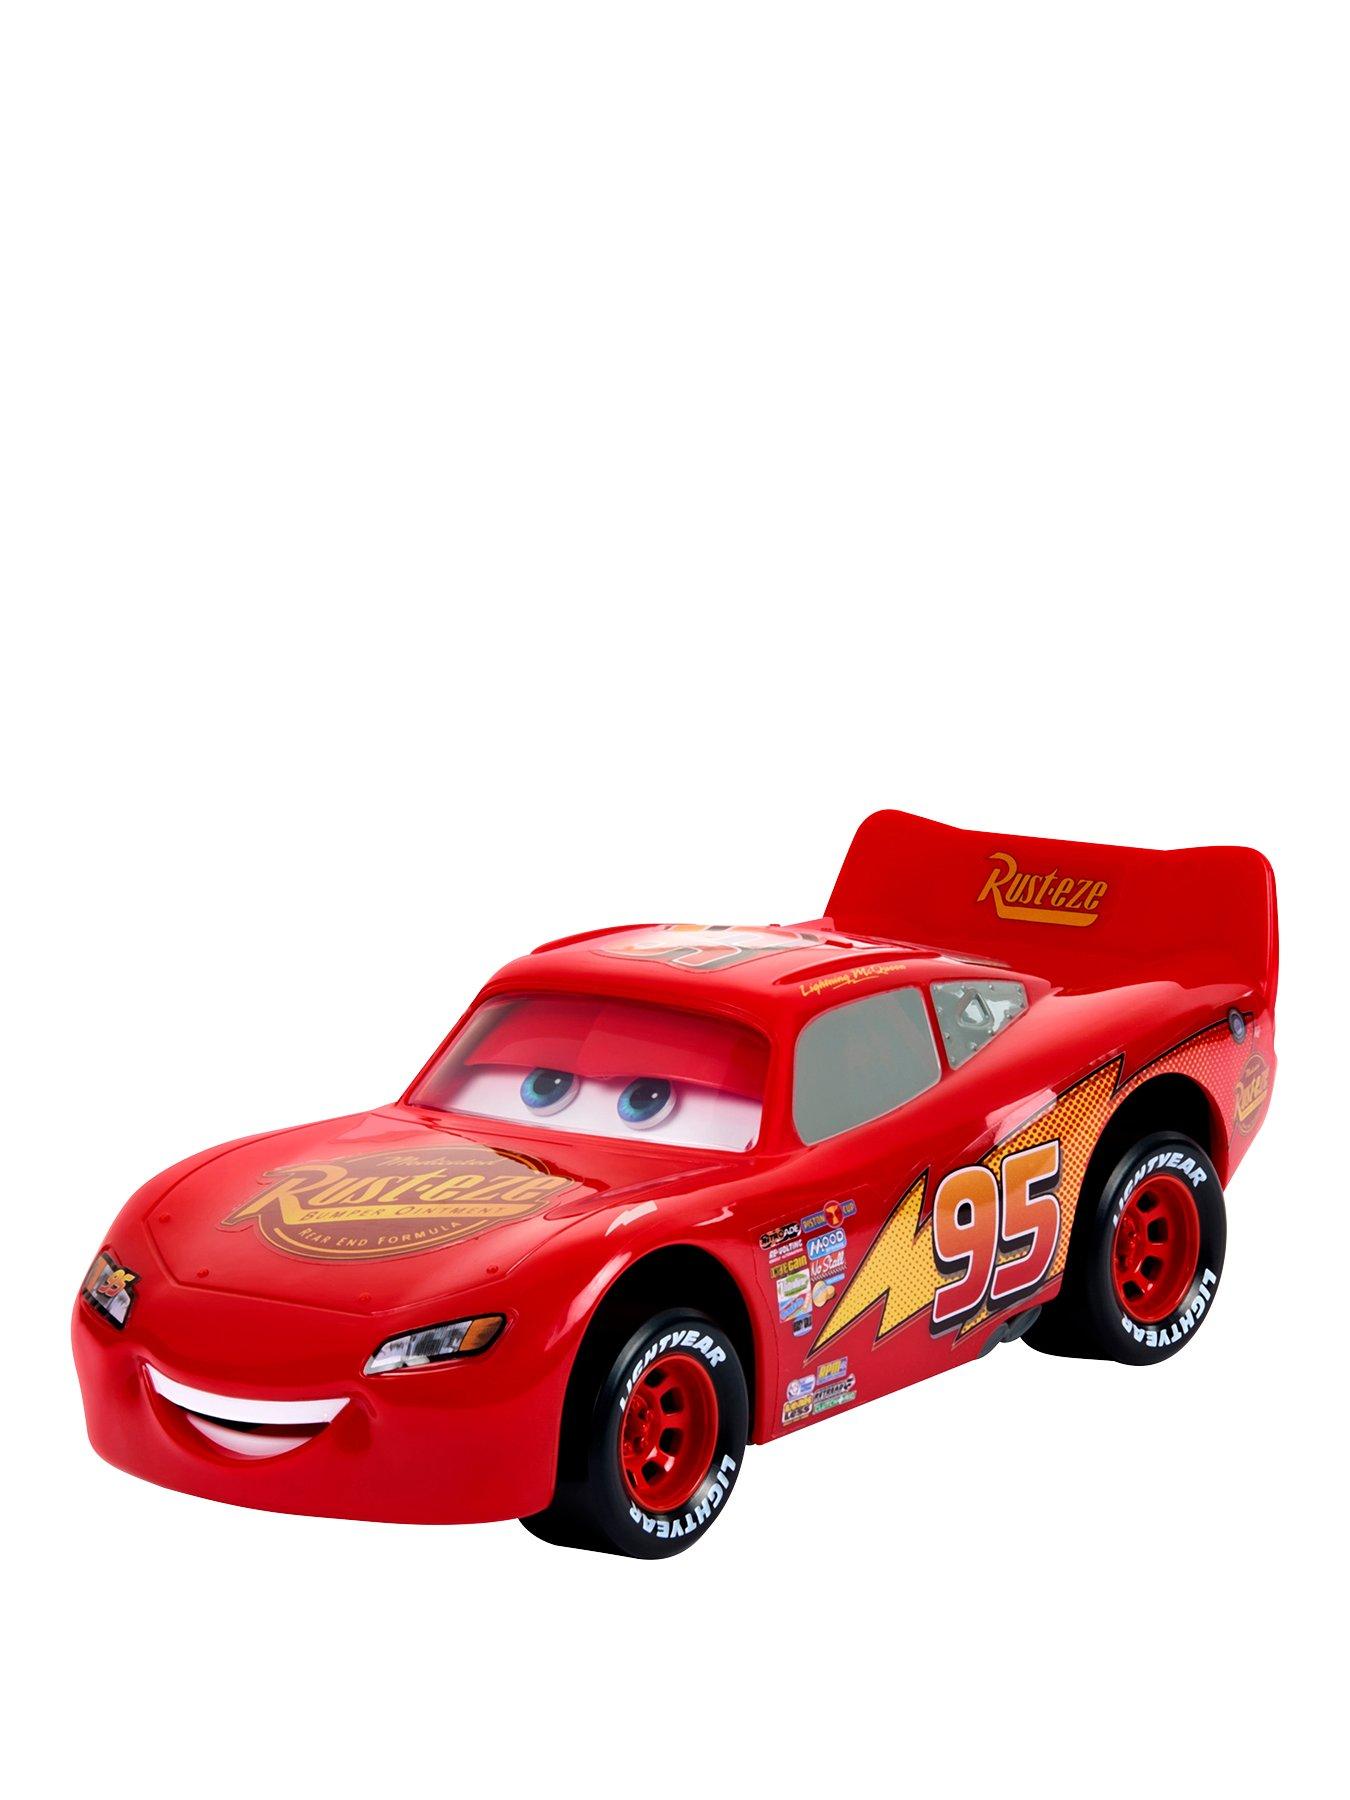 Disney Pixar Cars Toy Cars & Trucks, Moving Moments Lightning McQueen  Vehicle with Moving Eyes & Mouth 